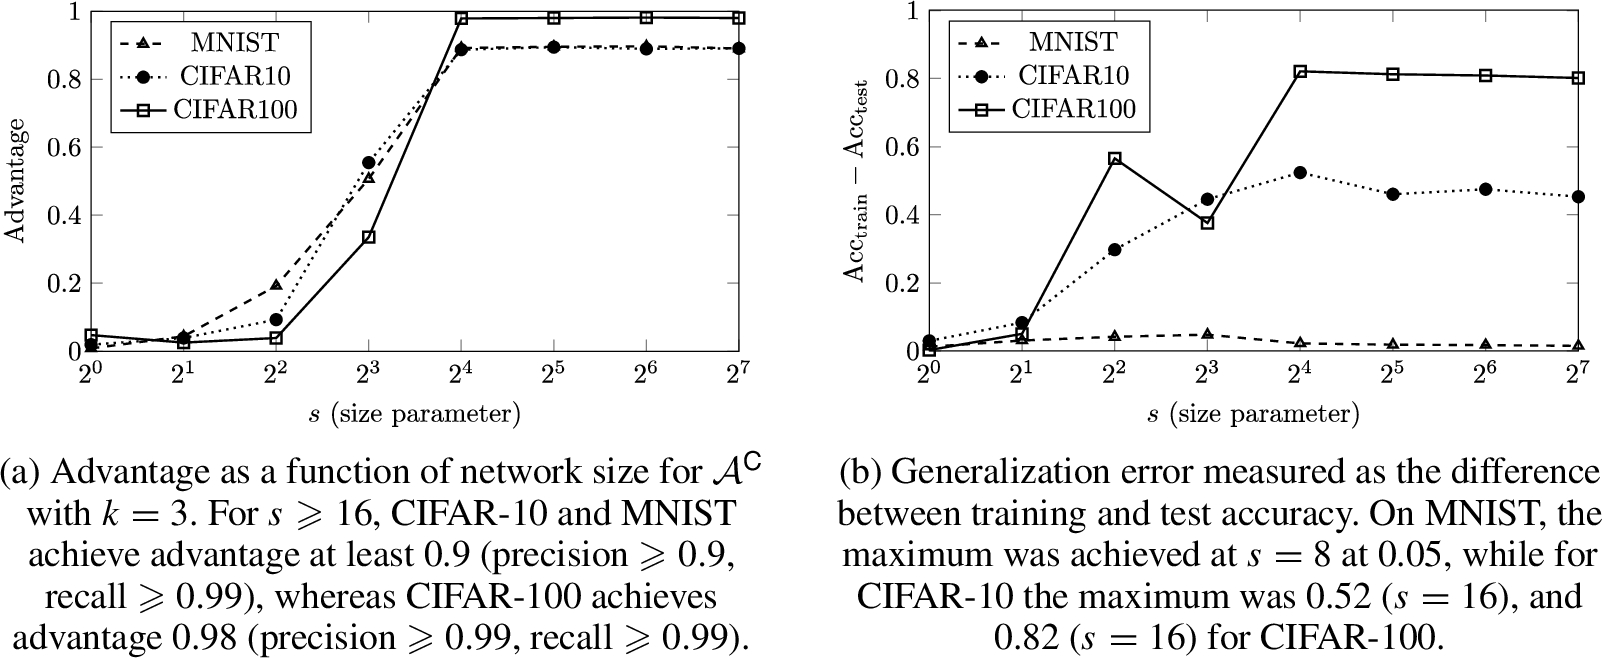 Results of the colluding training algorithm (Algorithm 1) and the colluding membership adversary (Adversary 3) on CNNs trained on MNIST, CIFAR-10, and CIFAR-100. The size parameter was configured to take values s=2i for i∈[0,7]. Regardless of the models’ generalization performance, when the network is sufficiently large, the attack achieves high advantage (⩾0.98) without affecting predictive accuracy.